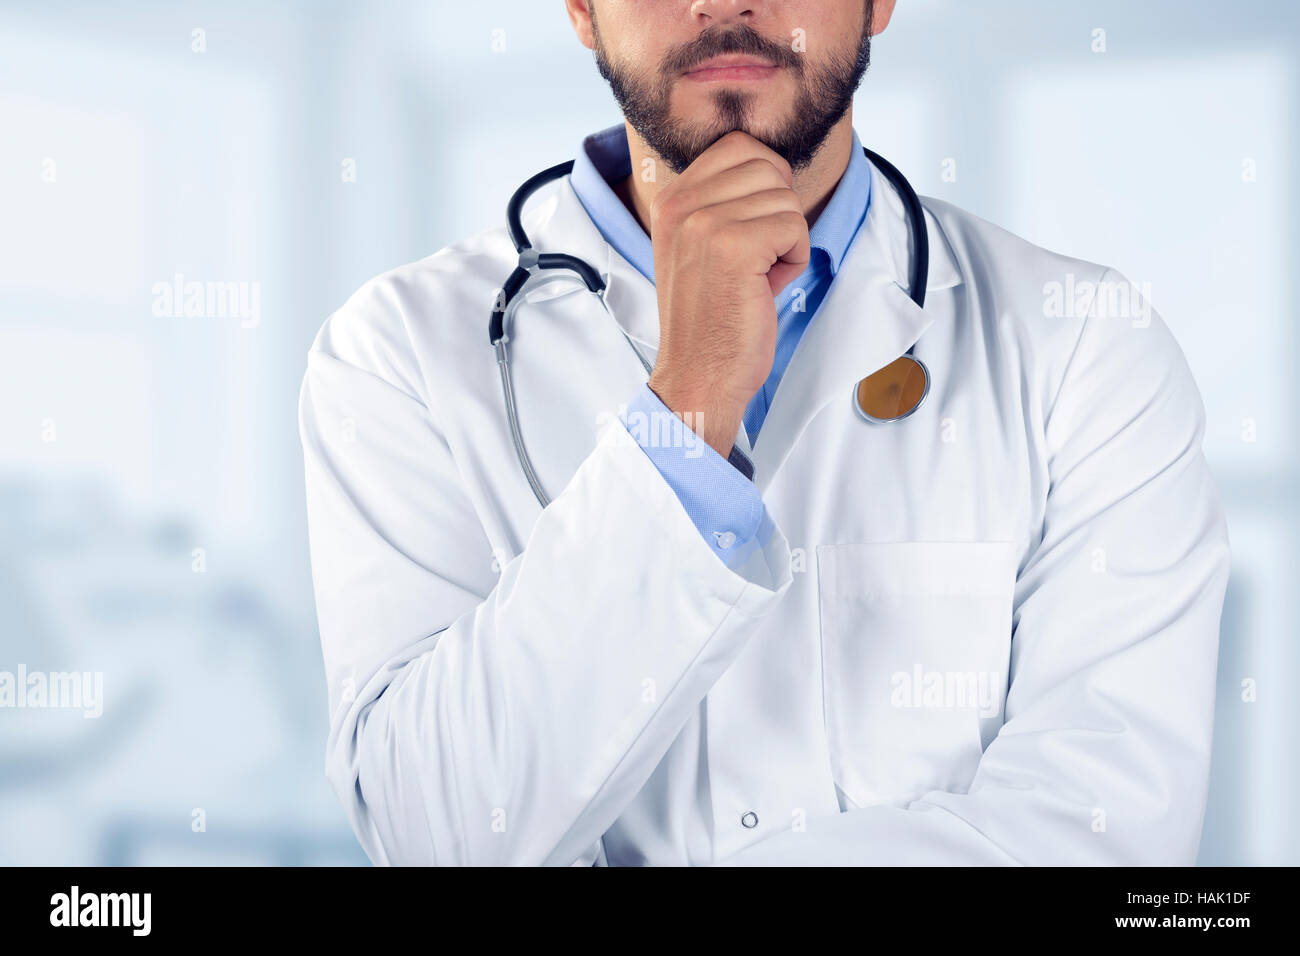 doctor standing with hand on chin Stock Photo